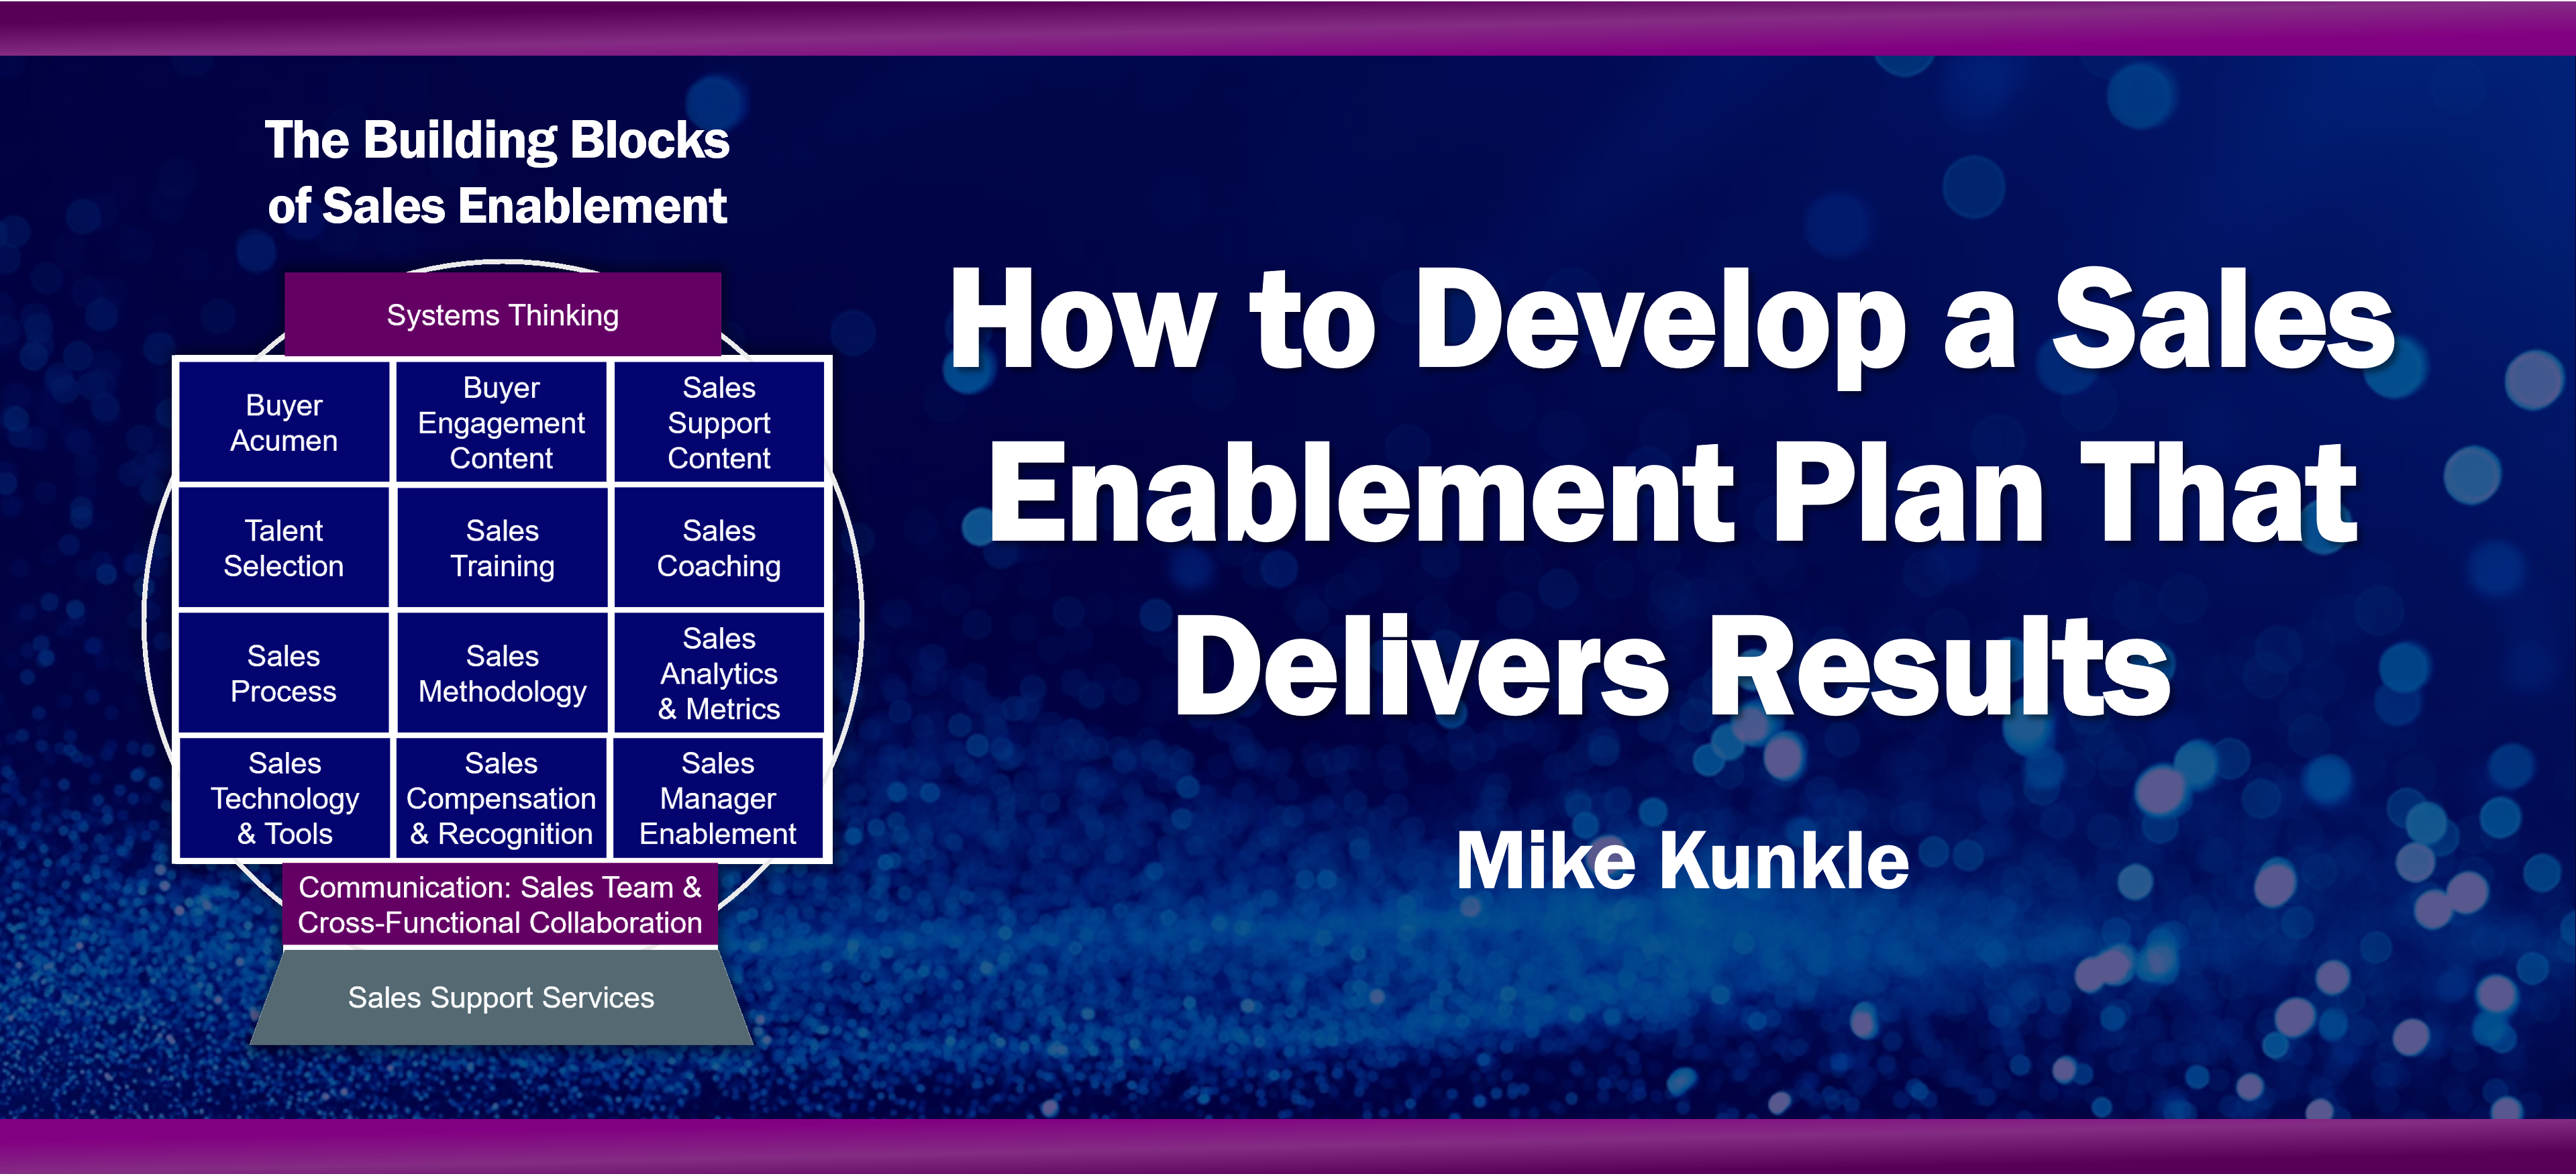 How to Develop a Sales Enablement Plan That Delivers Results